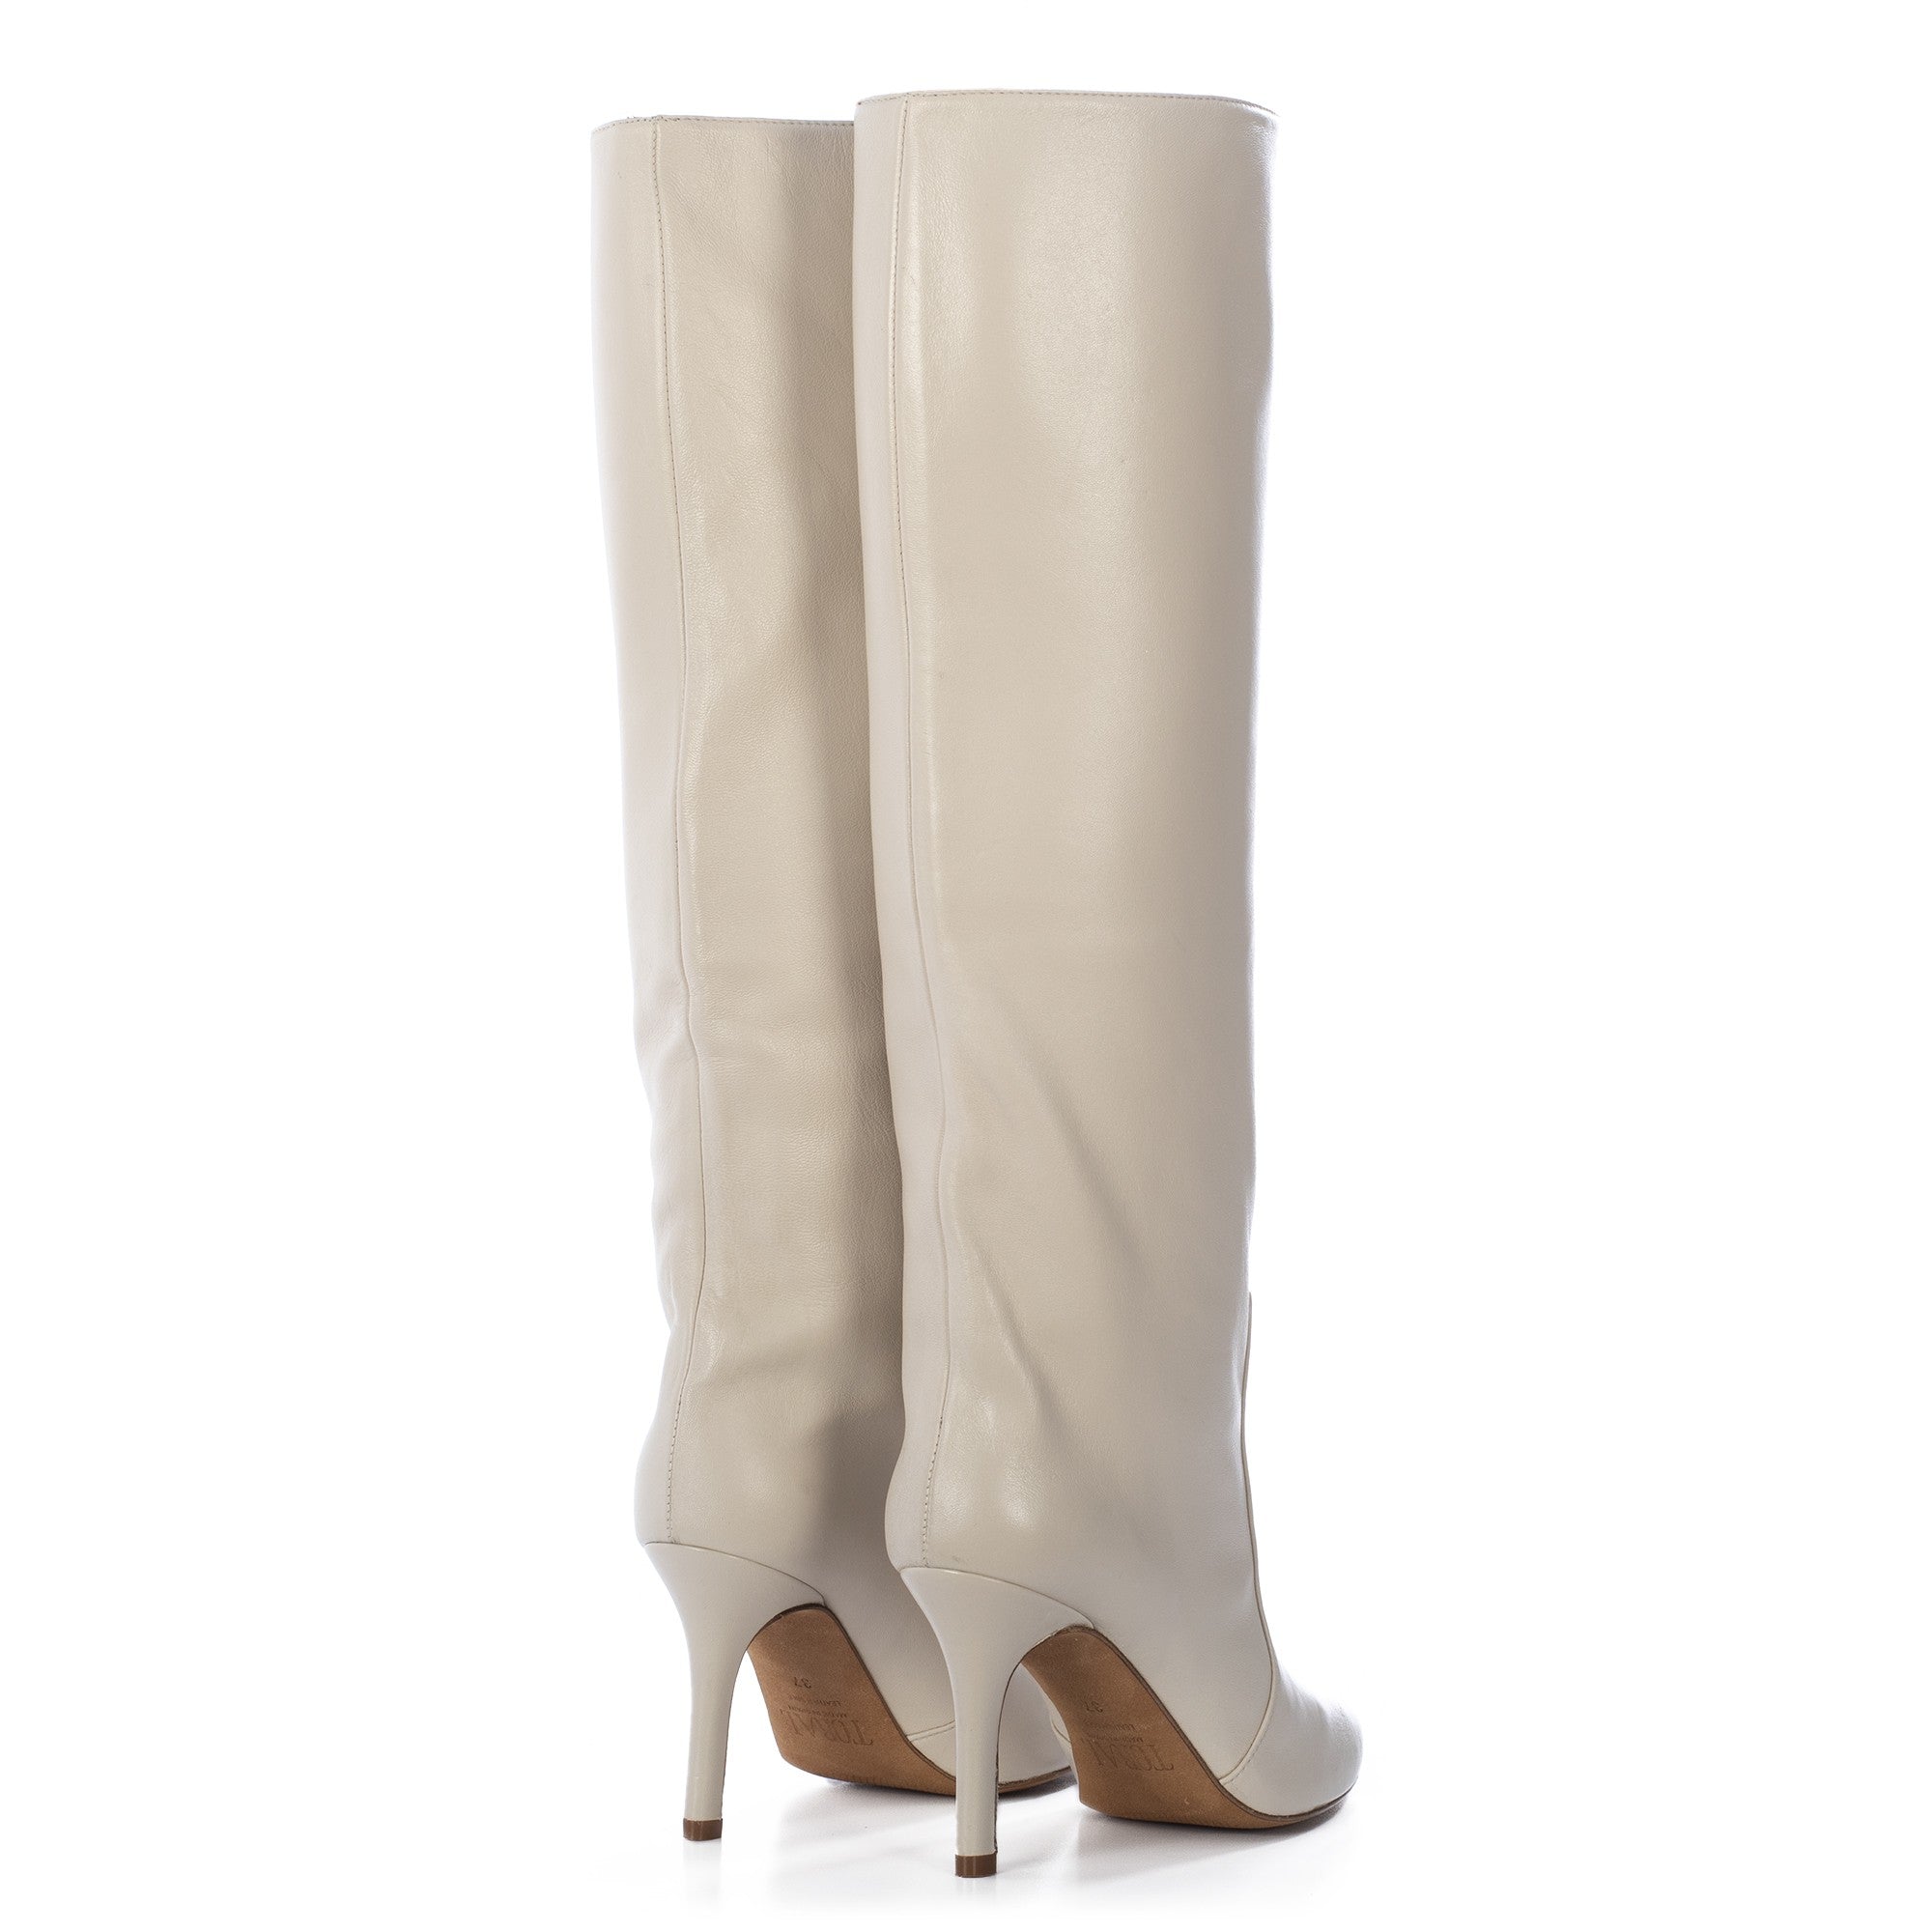 TORAL OFF-WHITE LEATHER TALL BOOTS – Toral